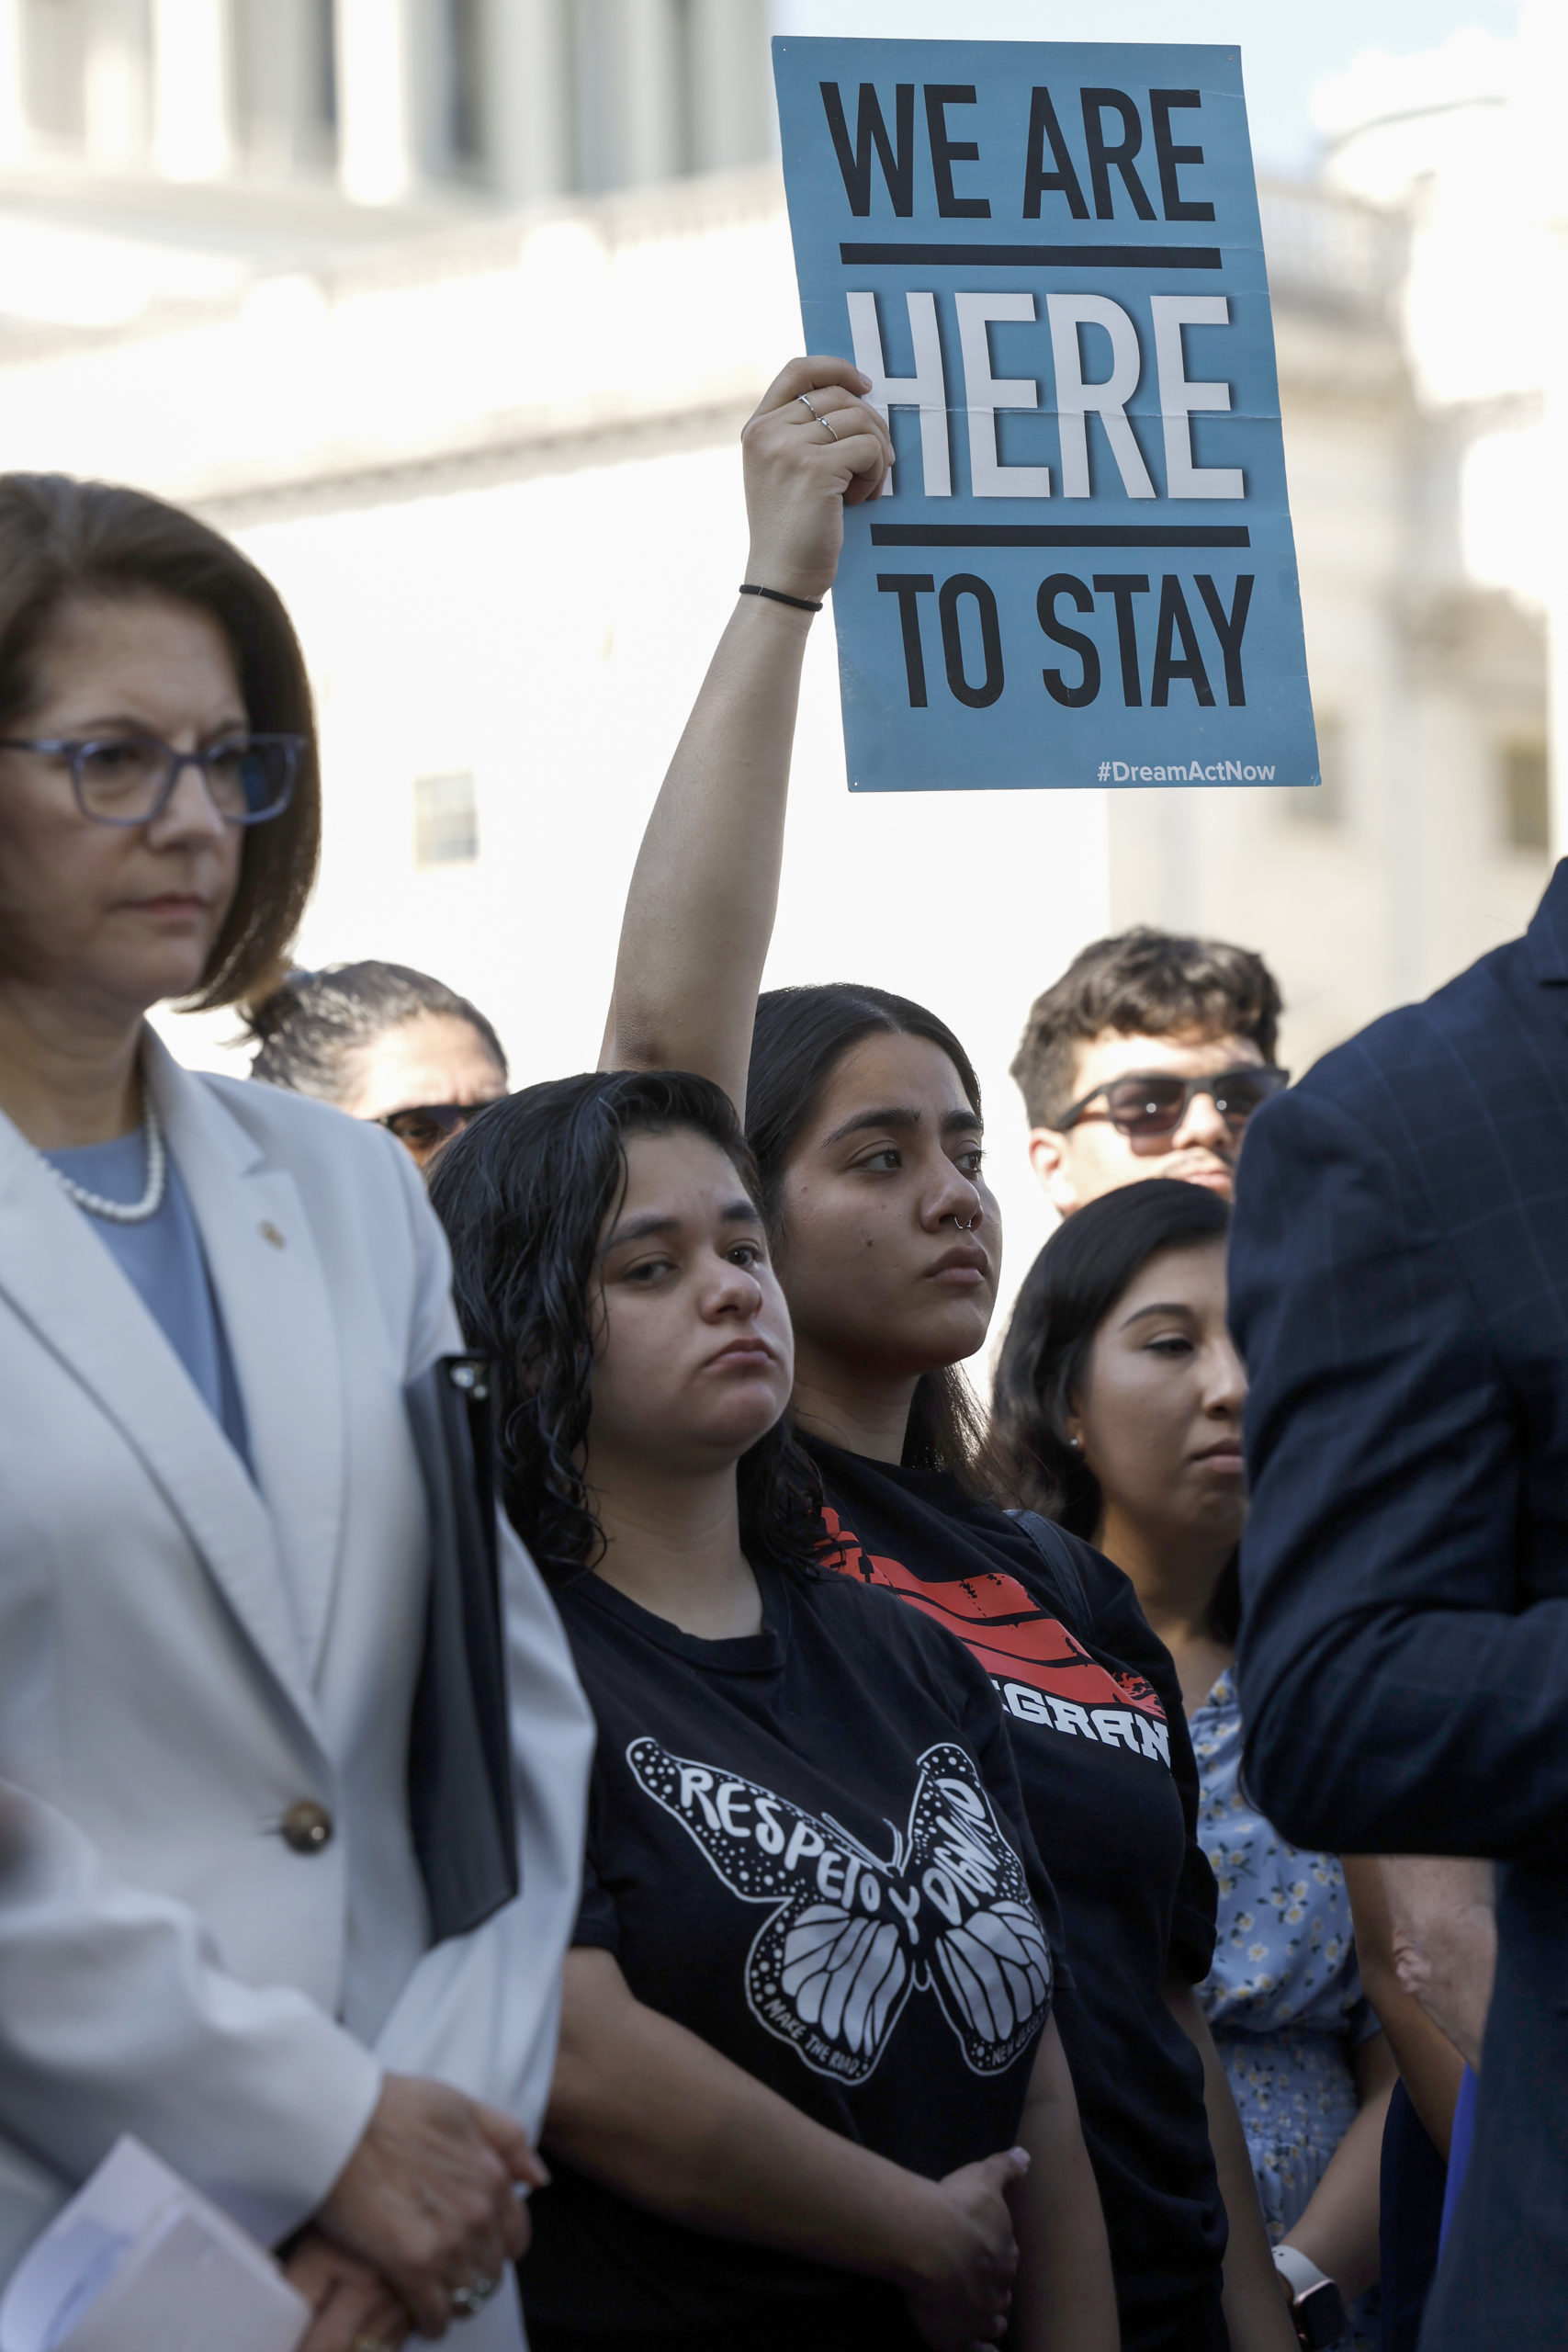 Activists carry signs as they listen to speakers at a news conference to mark the 10th anniversary of the "Deferred Action for Childhood Arrivals" (DACA) at the U.S. Capitol on June 15, 2022 in Washington, DC. 